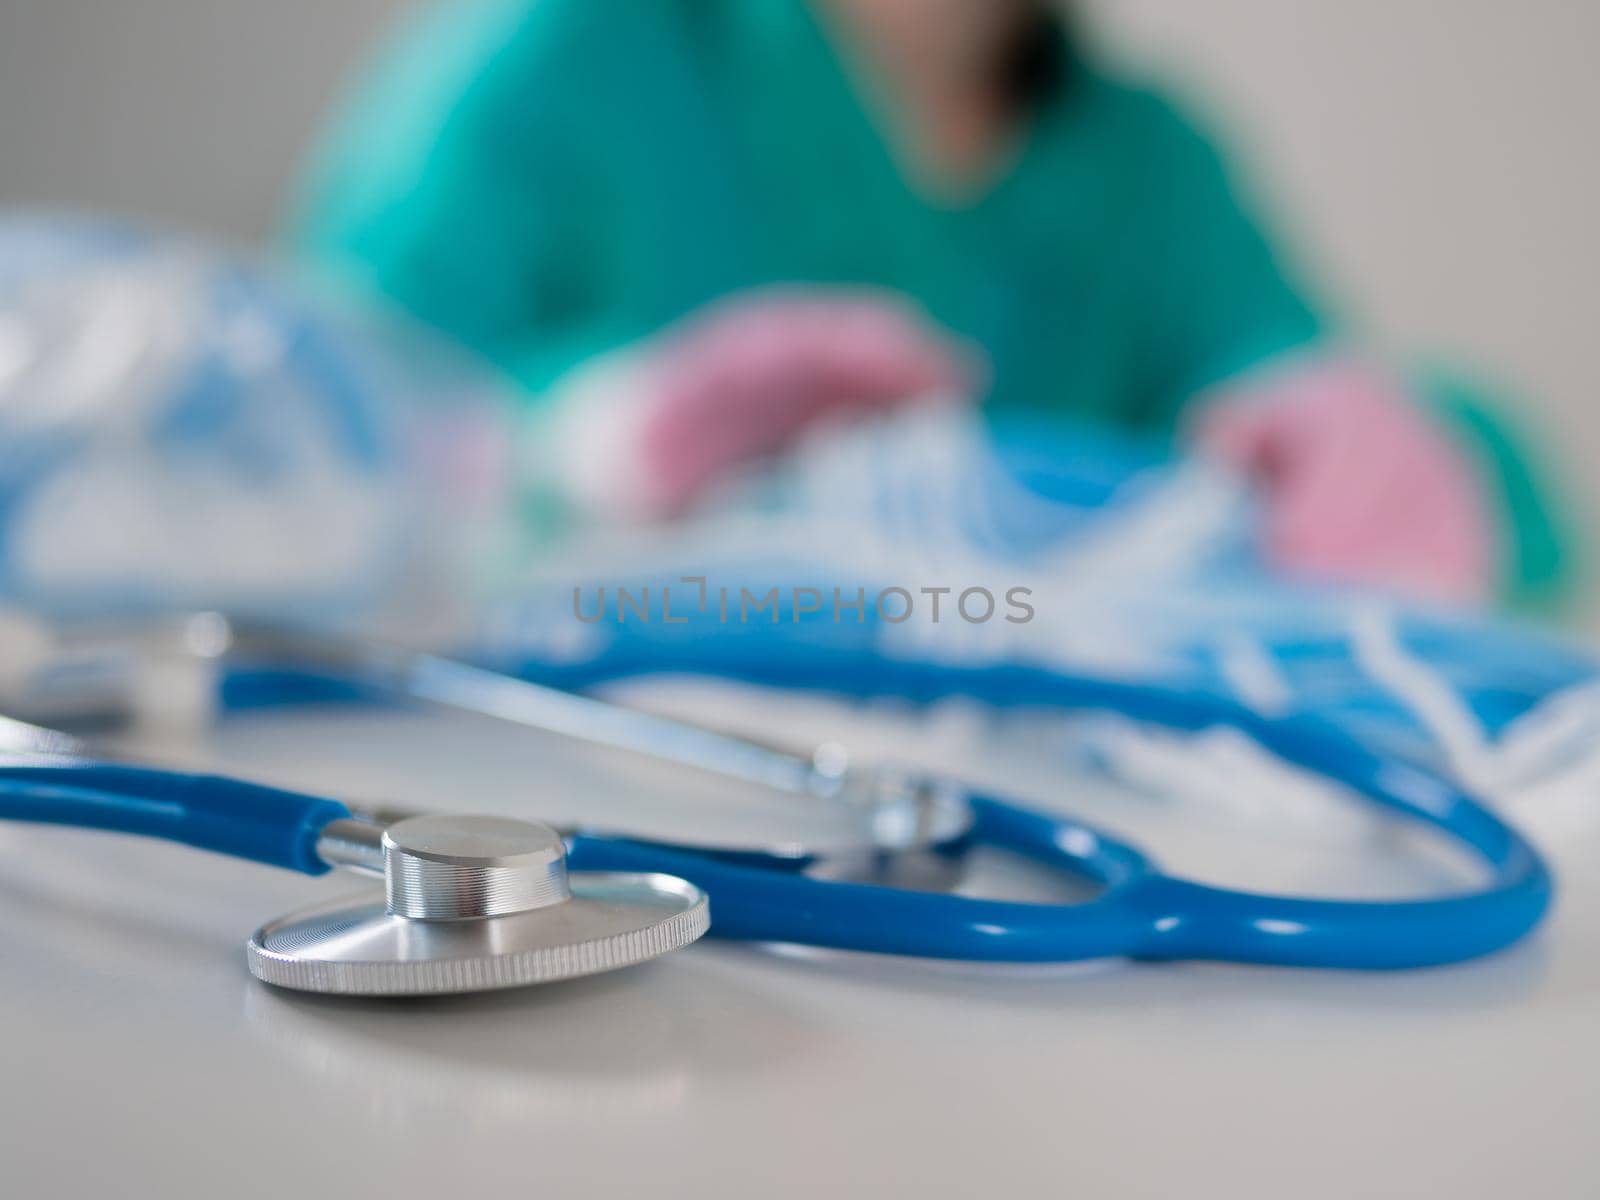 Counting the remaining medical masks in the doctor's office. Close-up of a stethoscope against the background of a doctor counting medical masks in the office. by Utlanov